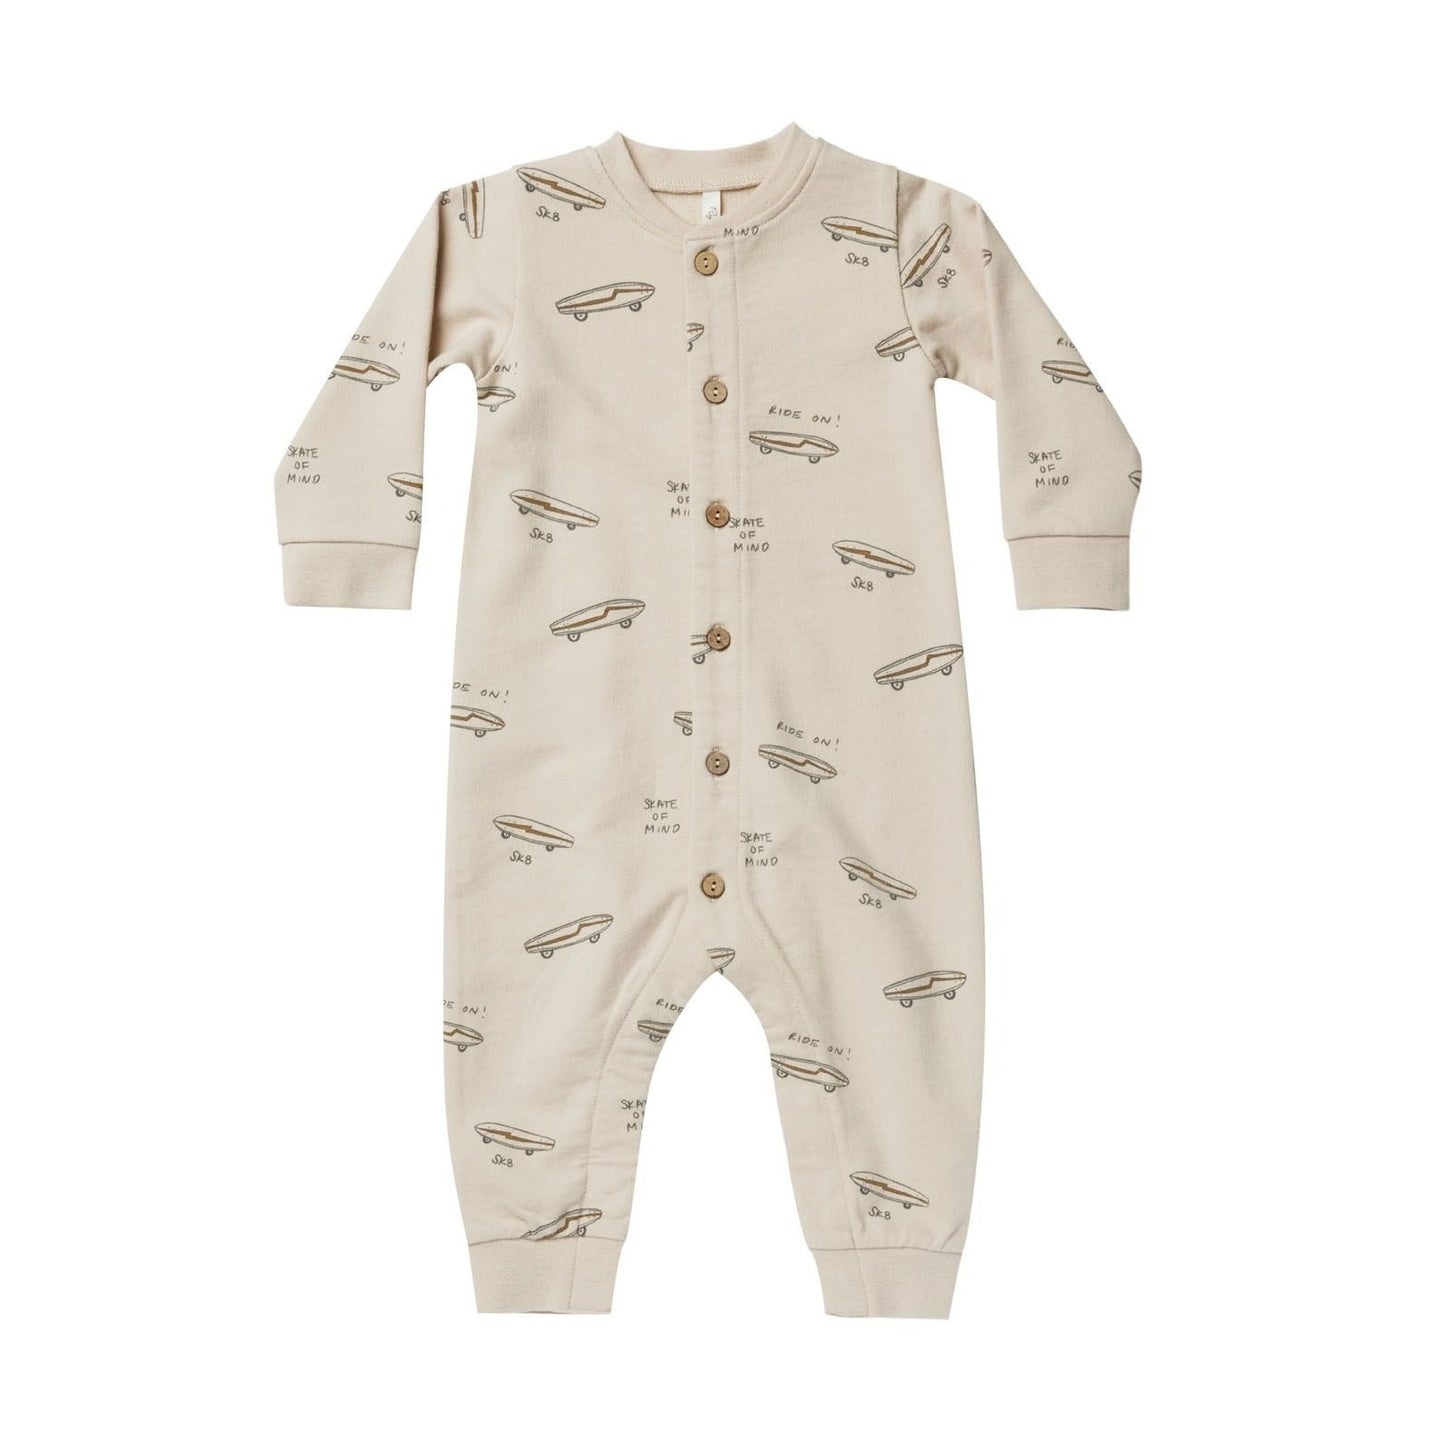 Rylee and Cru Button Jumpsuit - Skate - Natural